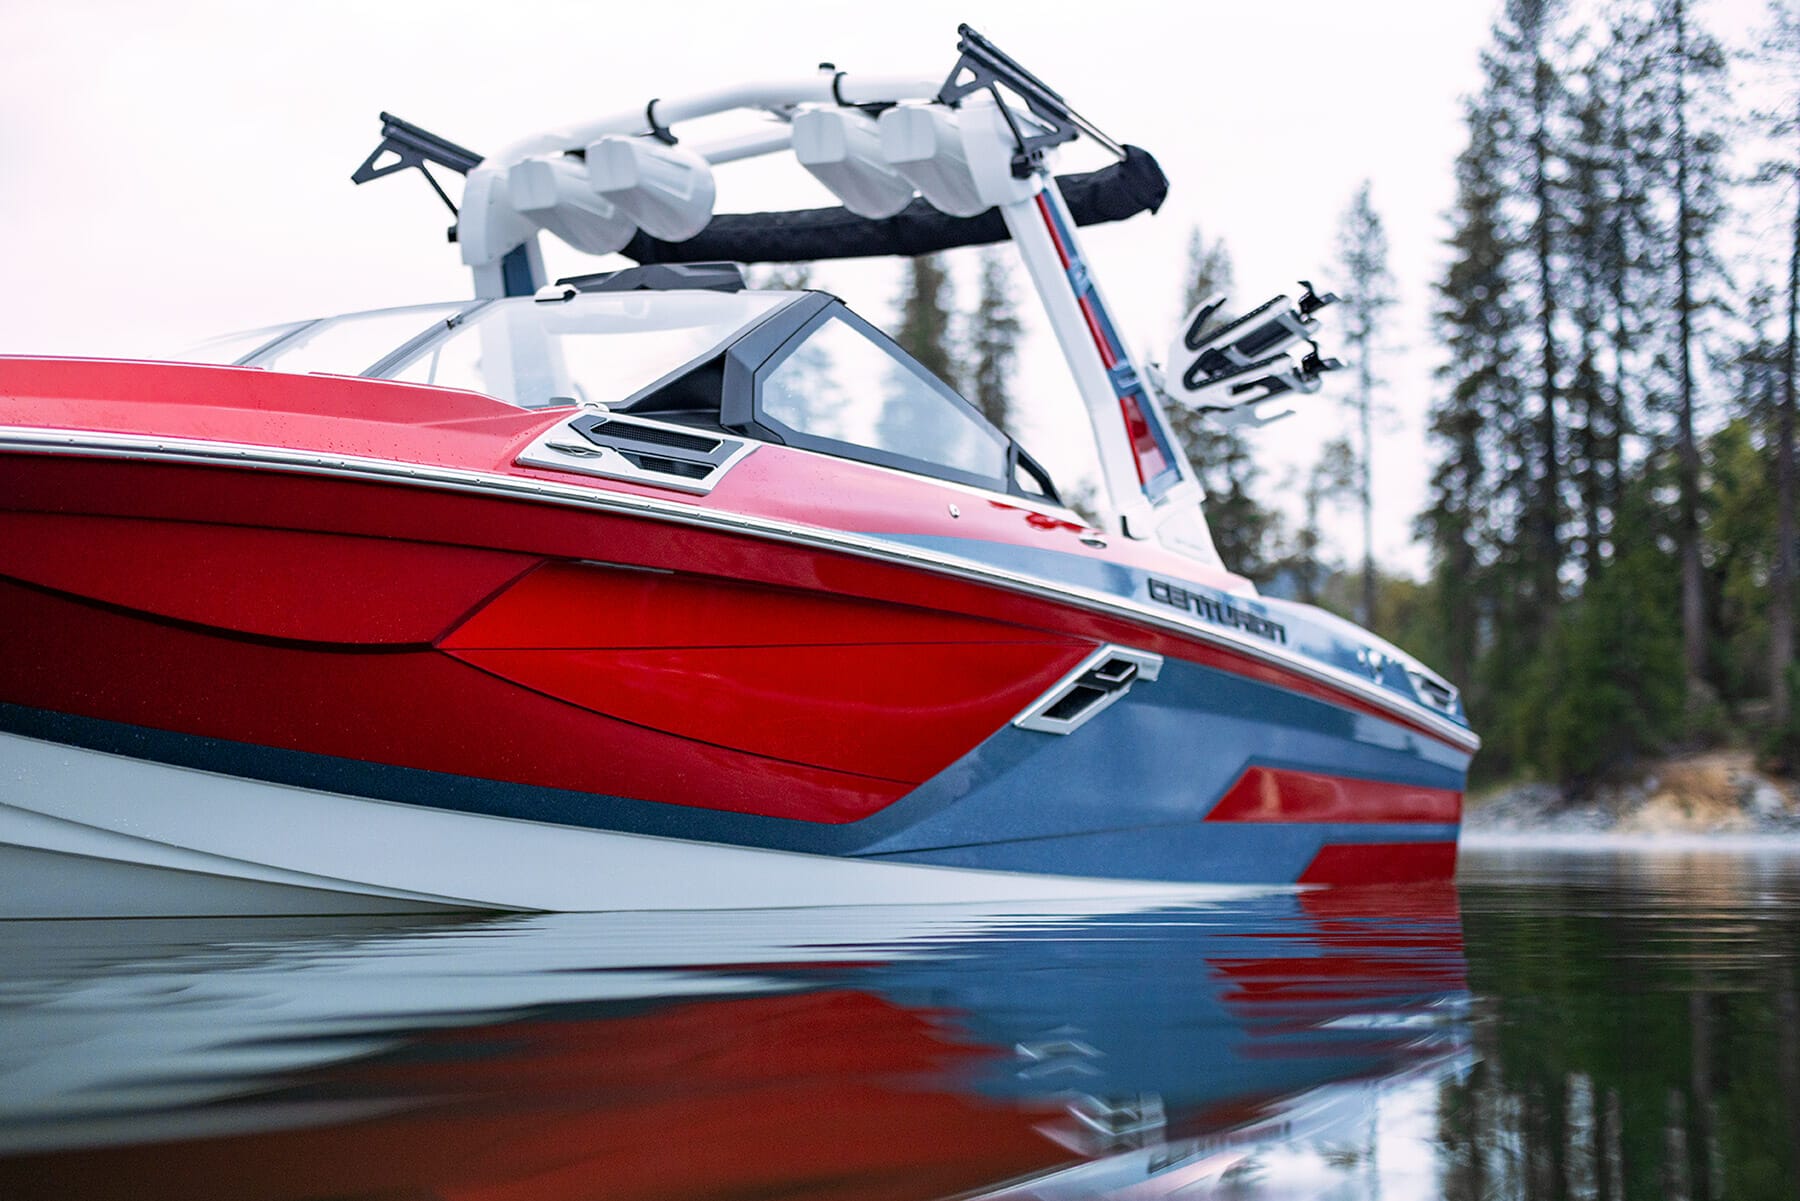 A red and blue wakeboat is sitting on a body of water.